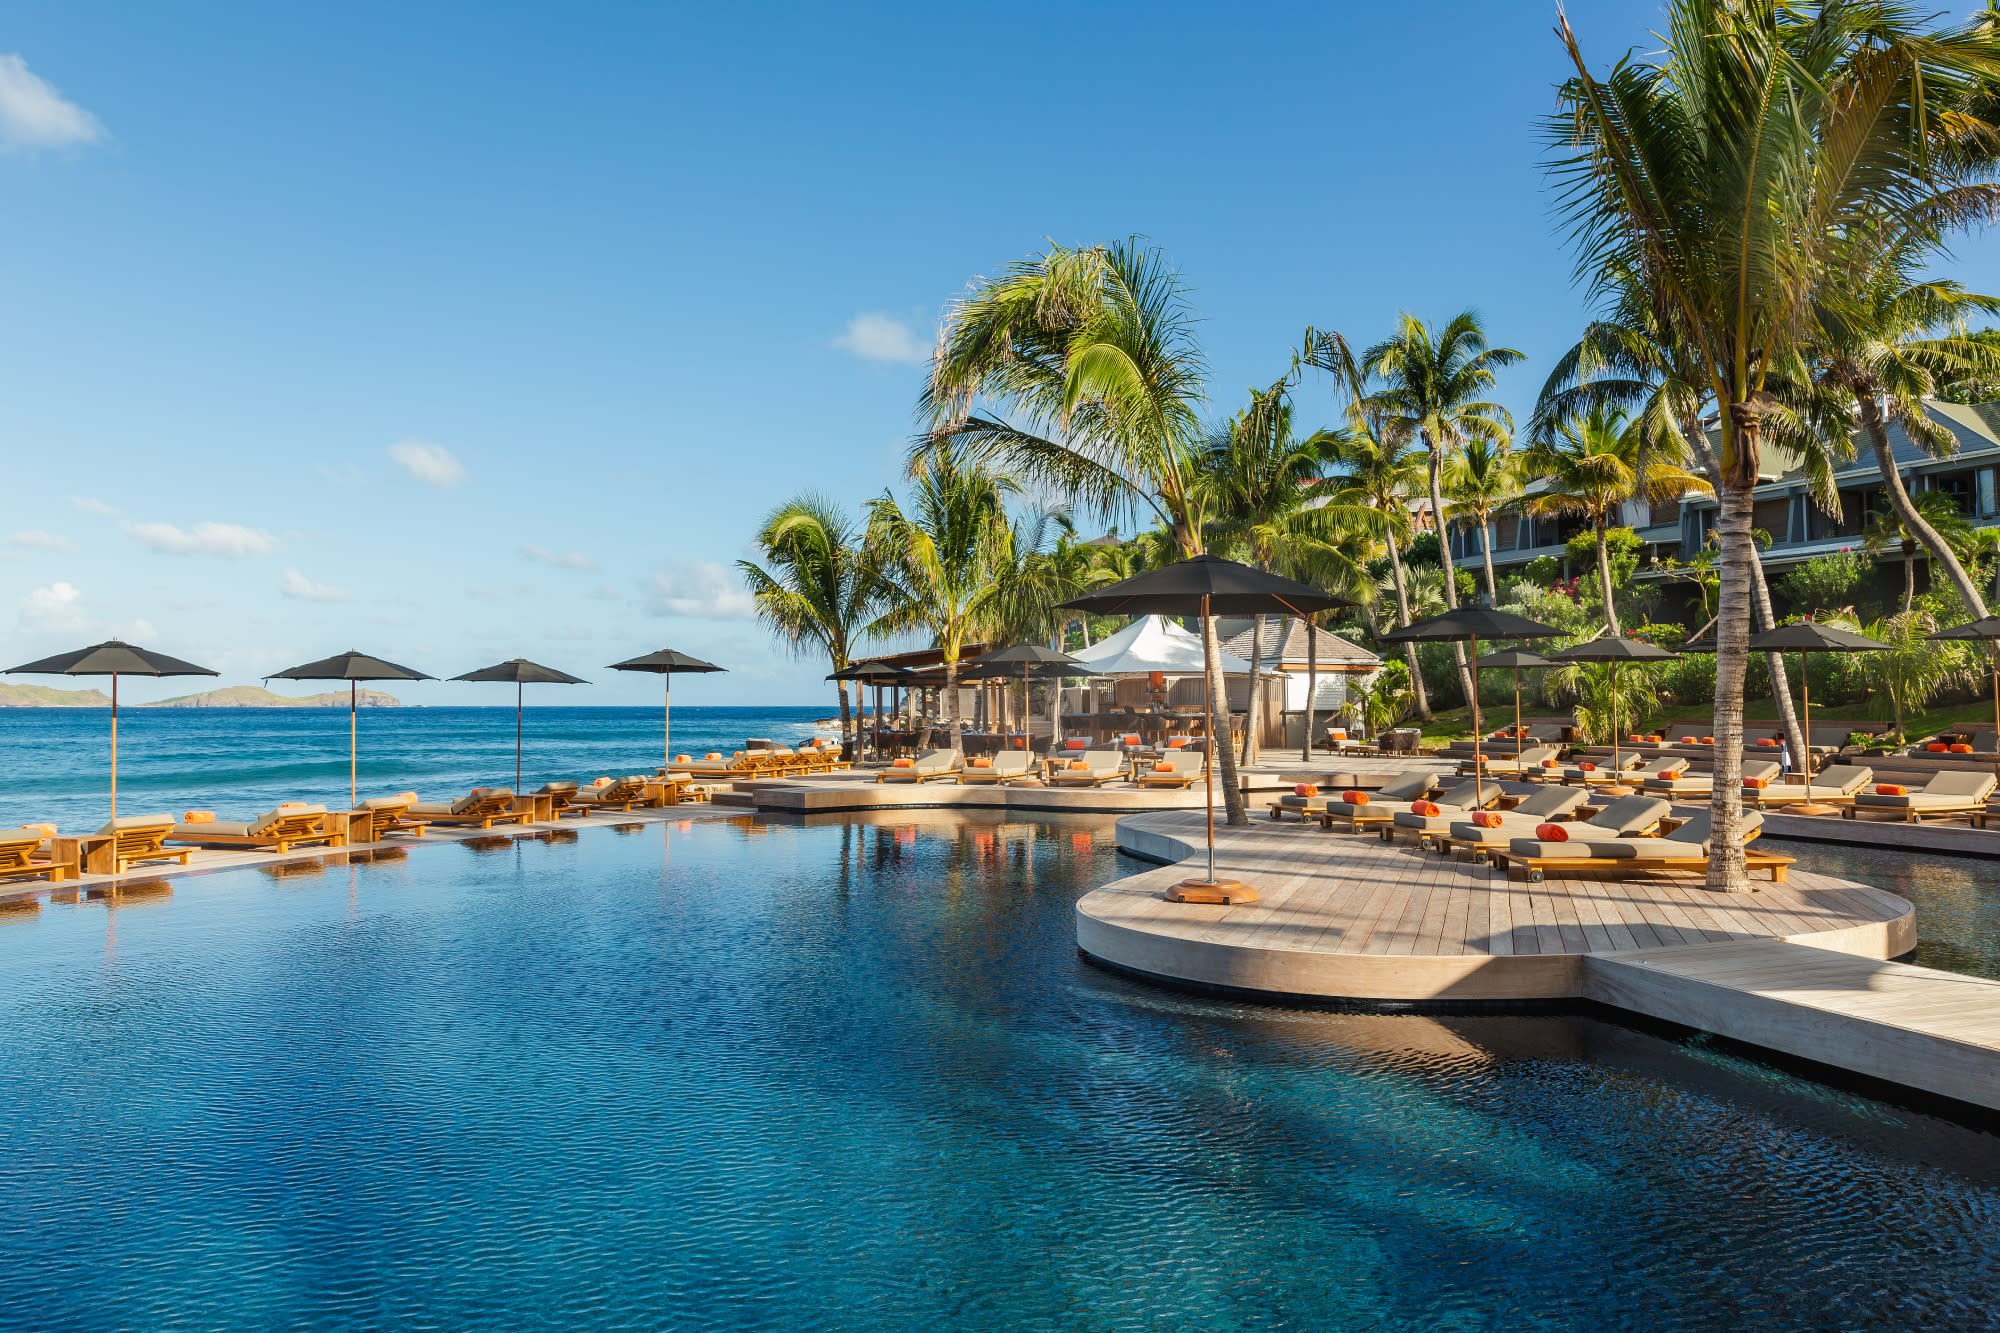 Here are the New Hotels in St. Barts of the Moment